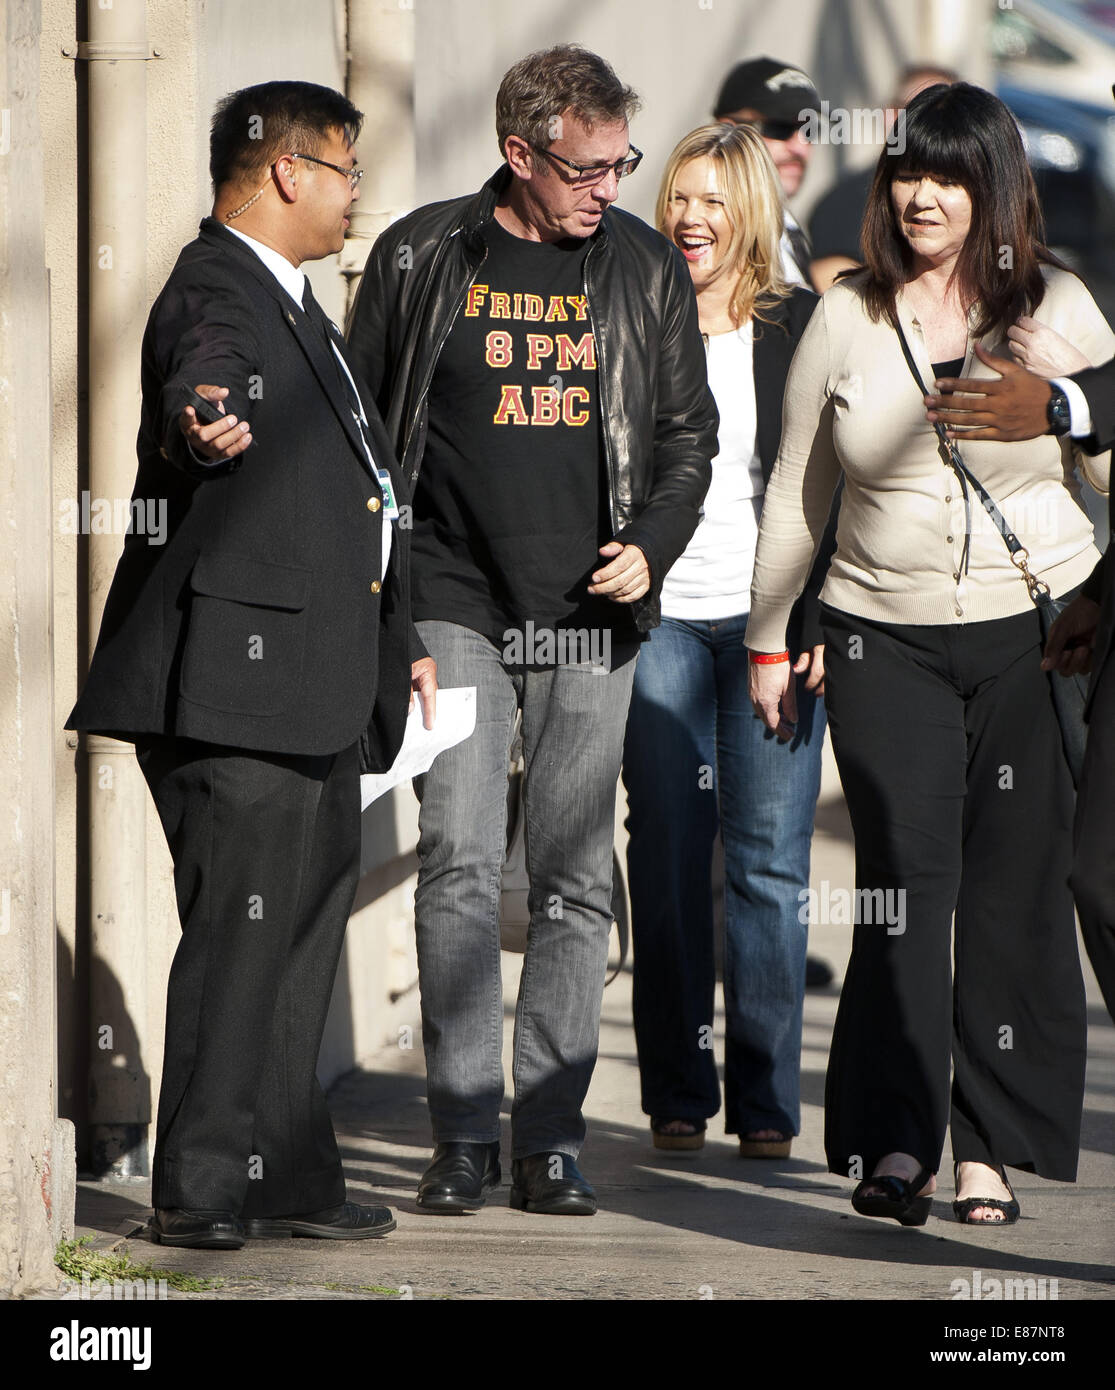 Hollywood, California, USA. 1st Oct, 2014. Tim Allen stopped by Jimmy Kimmel Live! for an appearance at the El Capitan Theatre in Hollywood on Wednesday October 1, 2014, and also to promote his new show for fall on ABC. After taping the show, Allen made his way down to greet fans, sign autographs and take photos. Credit:  David Bro/ZUMA Wire/Alamy Live News Stock Photo